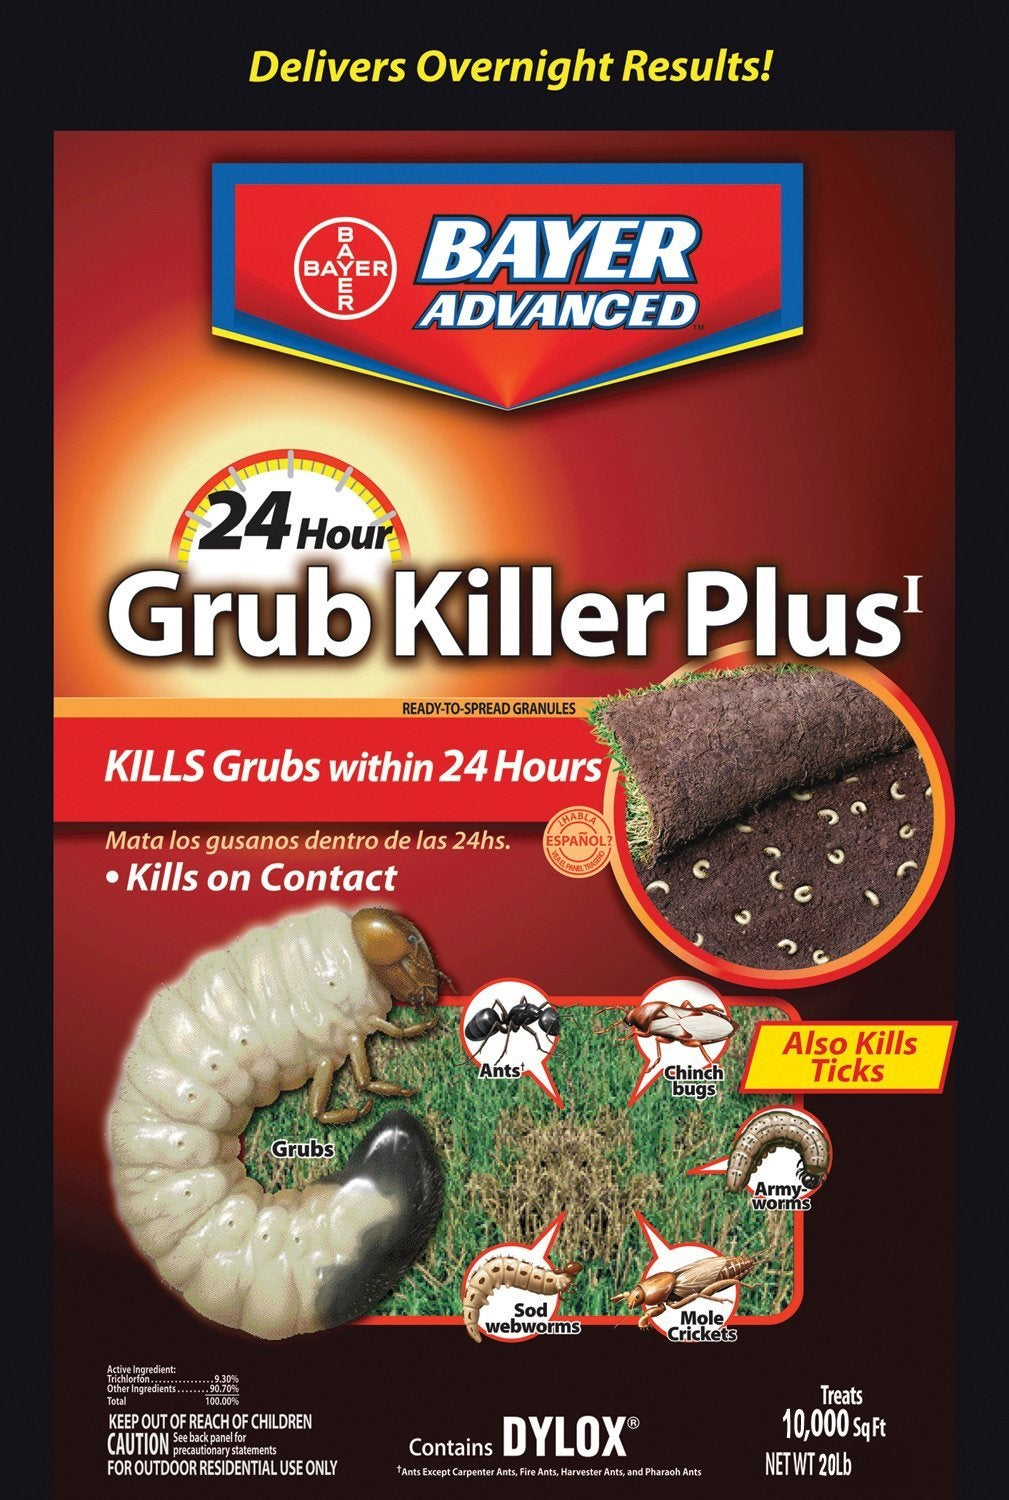 Buy bioadvanced 24 hour grub killer - Online store for lawn insect control, dry in USA, on sale, low price, discount deals, coupon code